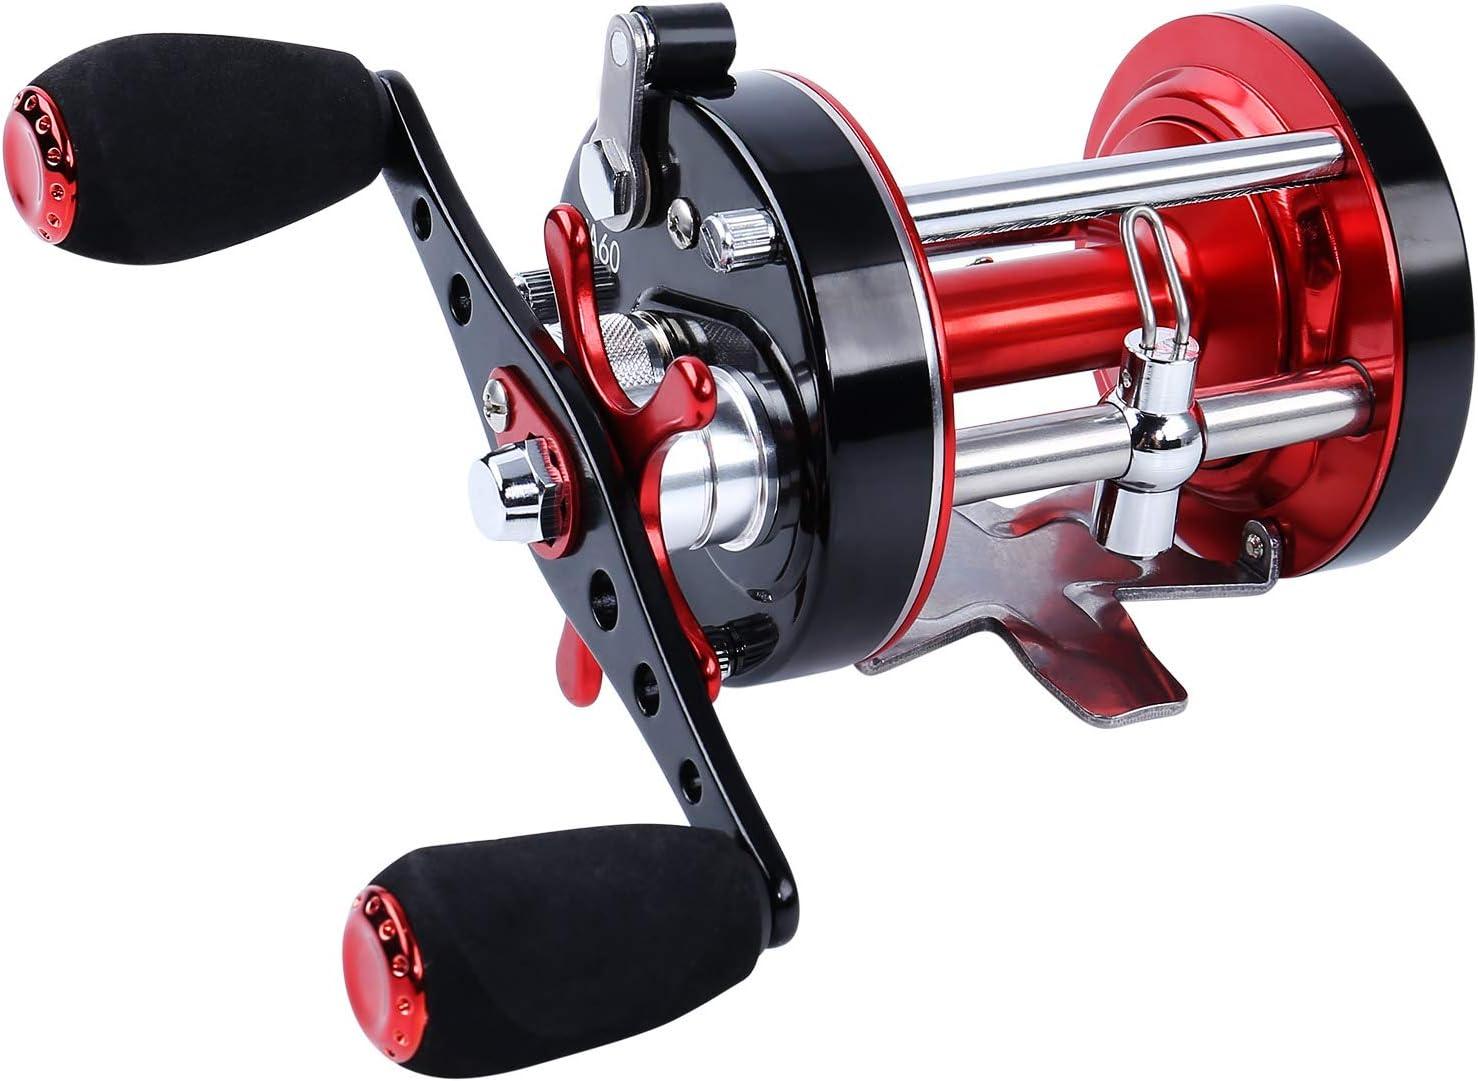 Sougayilang Fishing Reels Round Baitcasting Reel - Conventional Reel -  Reinforced Metal Body and Supreme Star Drag Right Hand-Red-Black Warrior6000